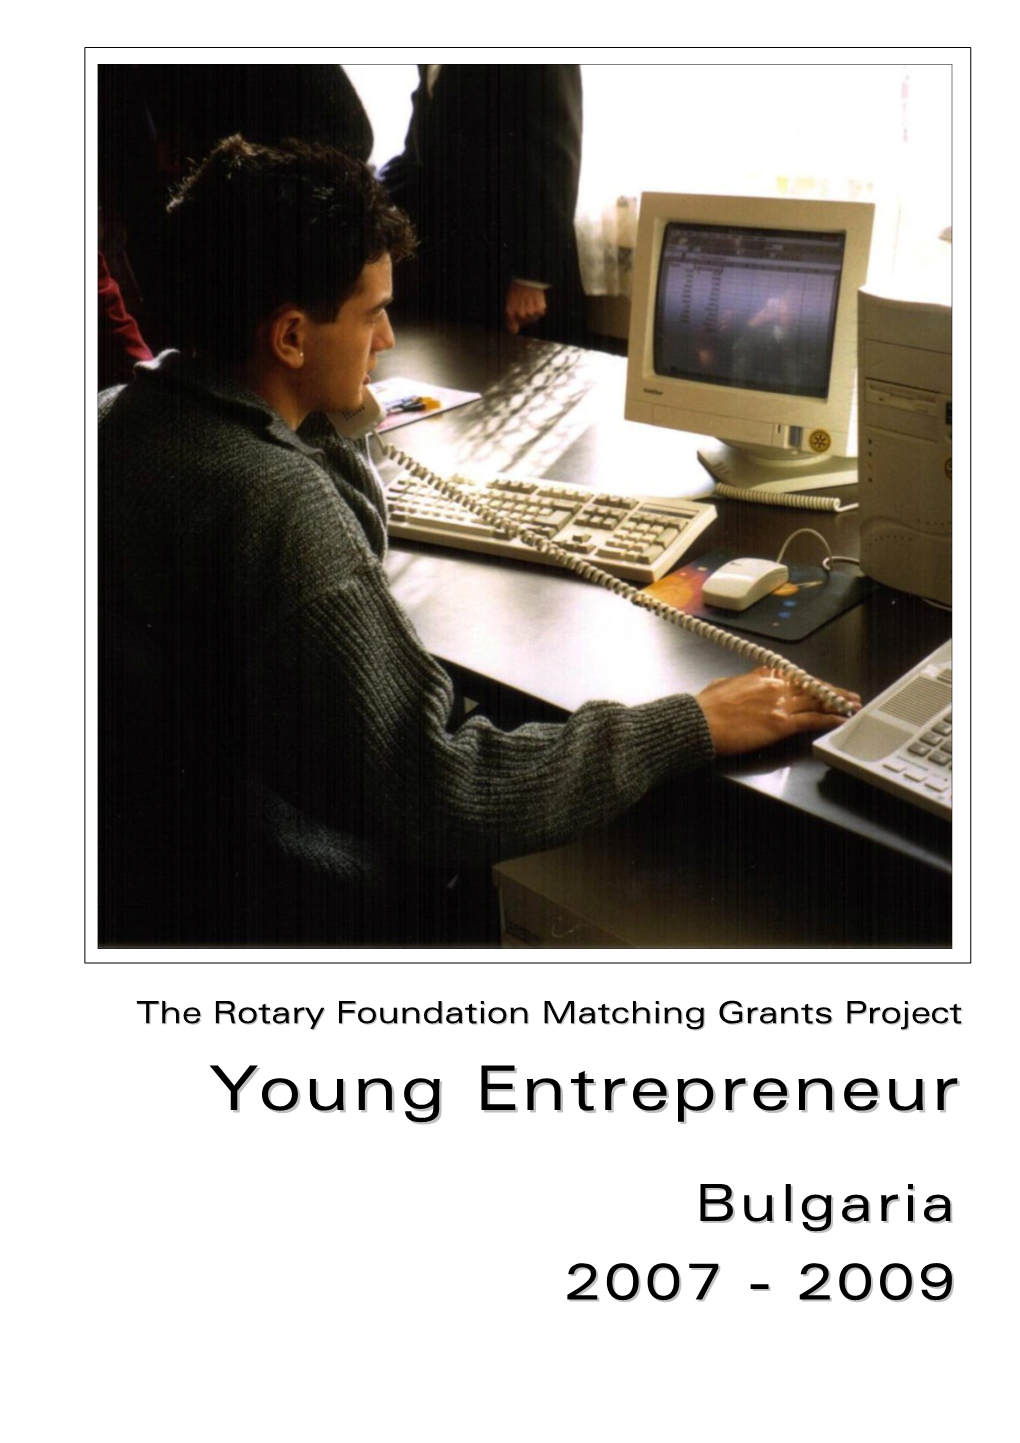 Young Entrepreneur Page 2 TRF Matching Grants Project 2007 - 2009